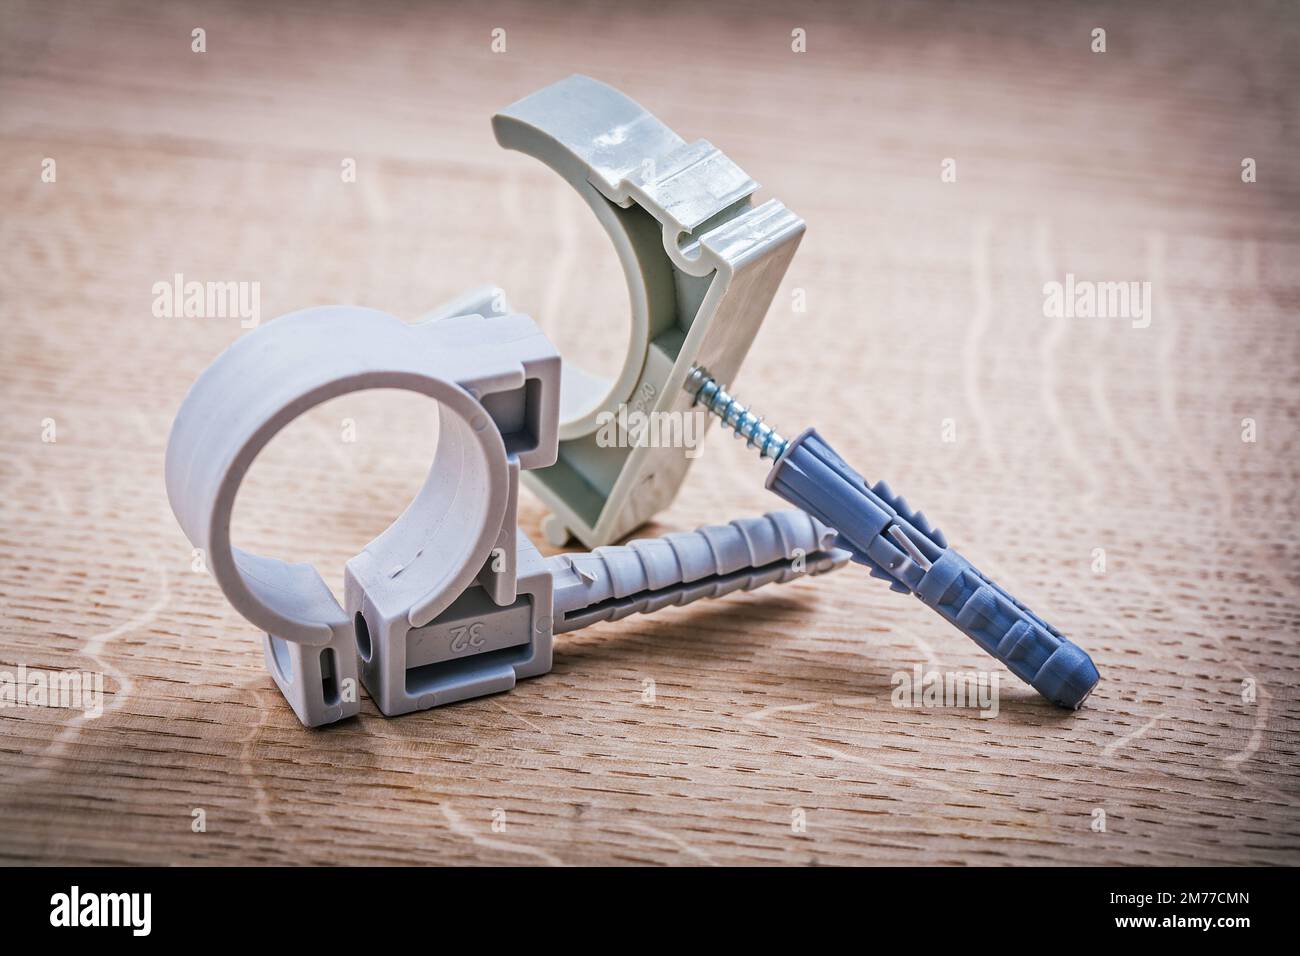 plastic fixators for pipes On Wooden Board Stock Photo